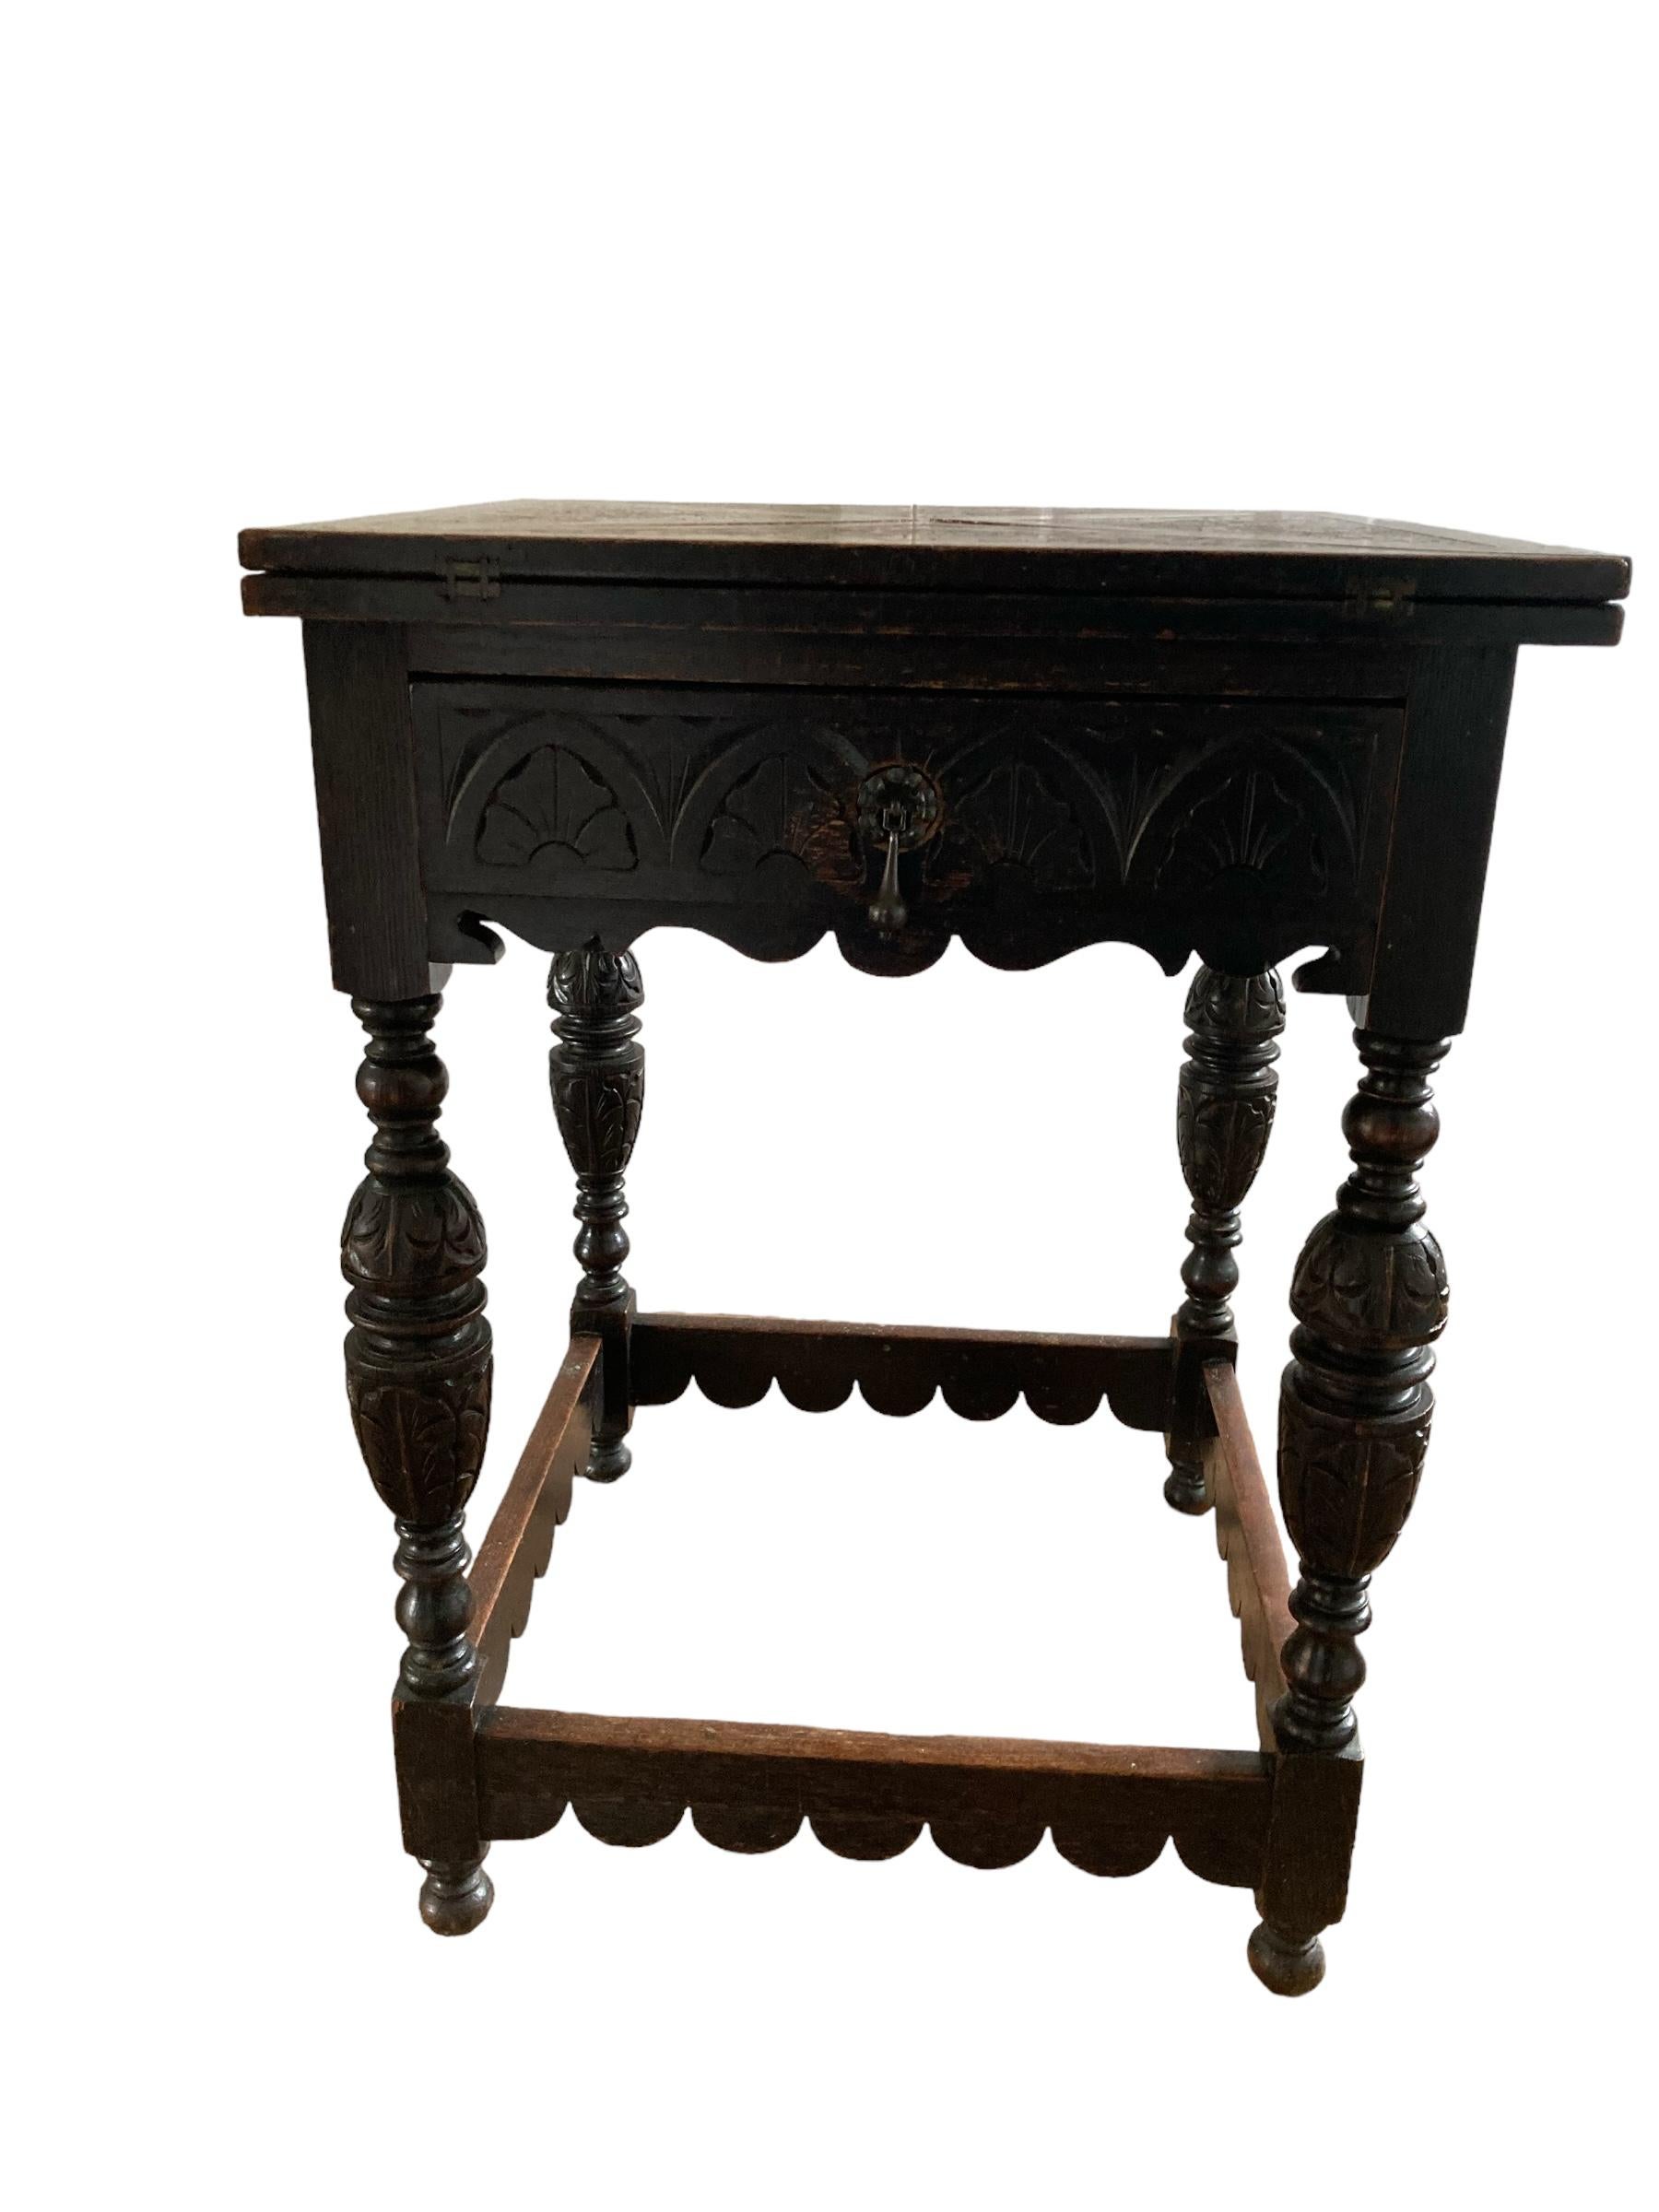 British Antique Carved Oak Envelope card Table with Single Drawer and gaming wells. For Sale